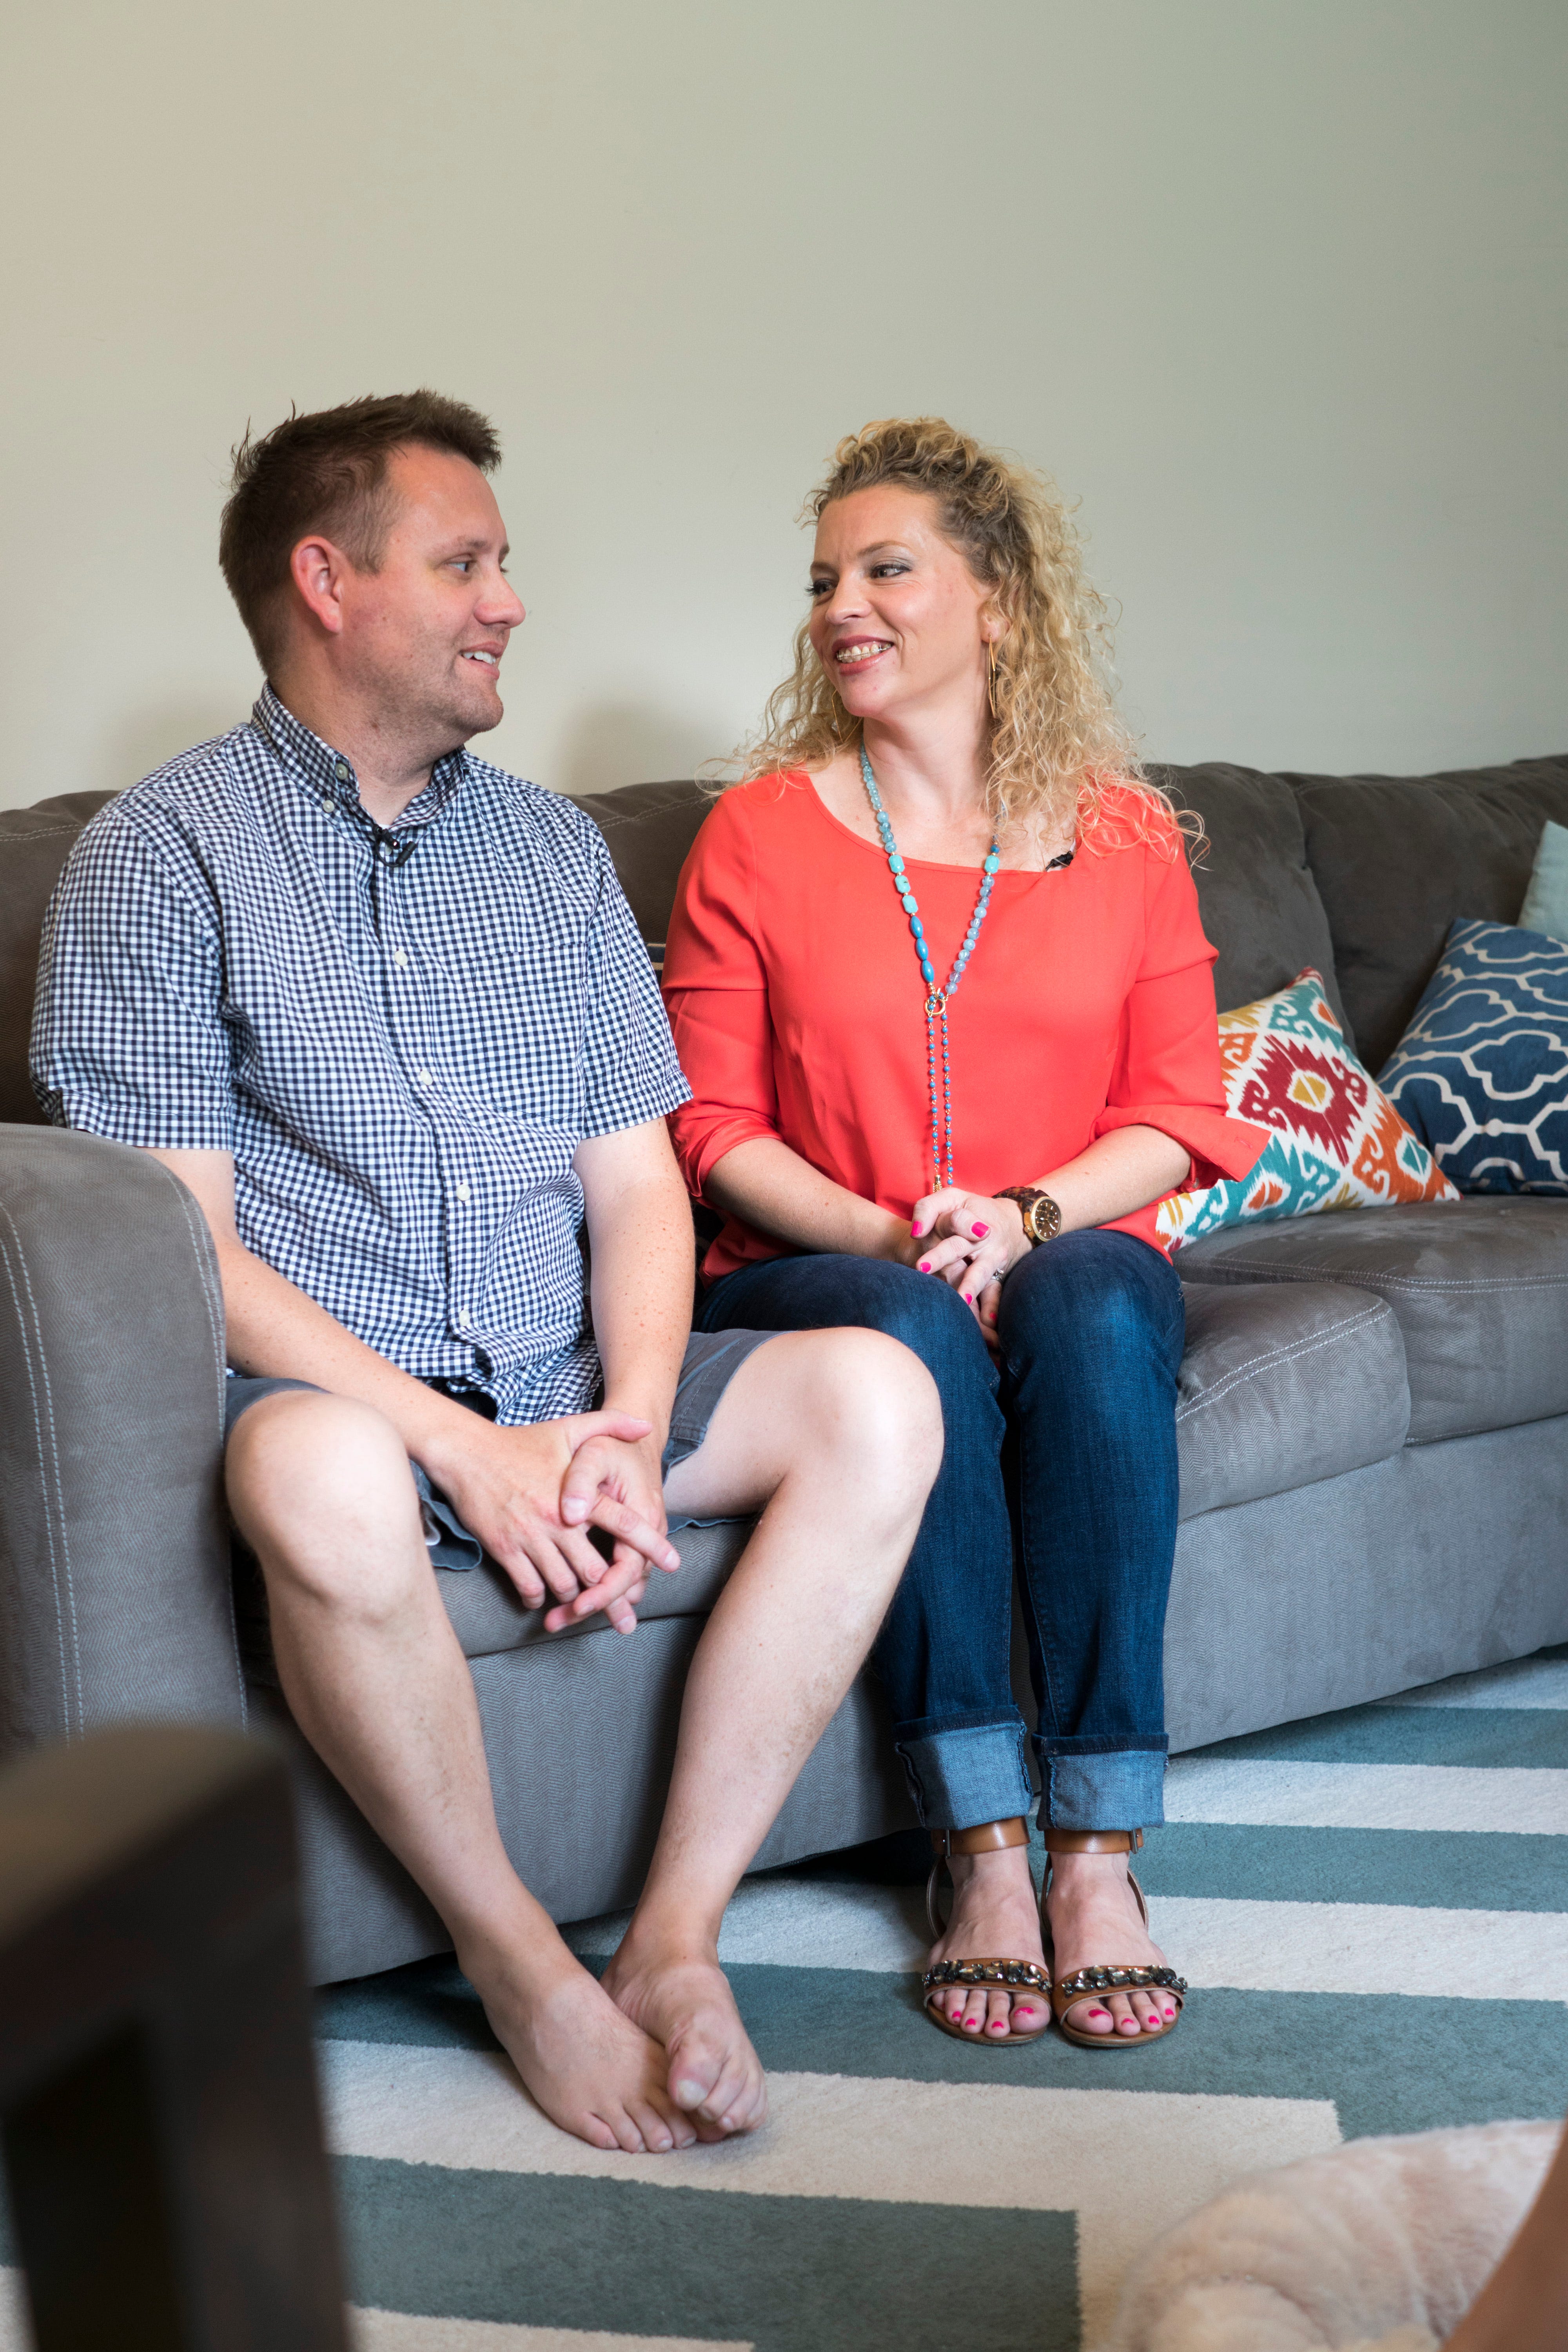 Adoption proves no less exhausting for couple who tried it all